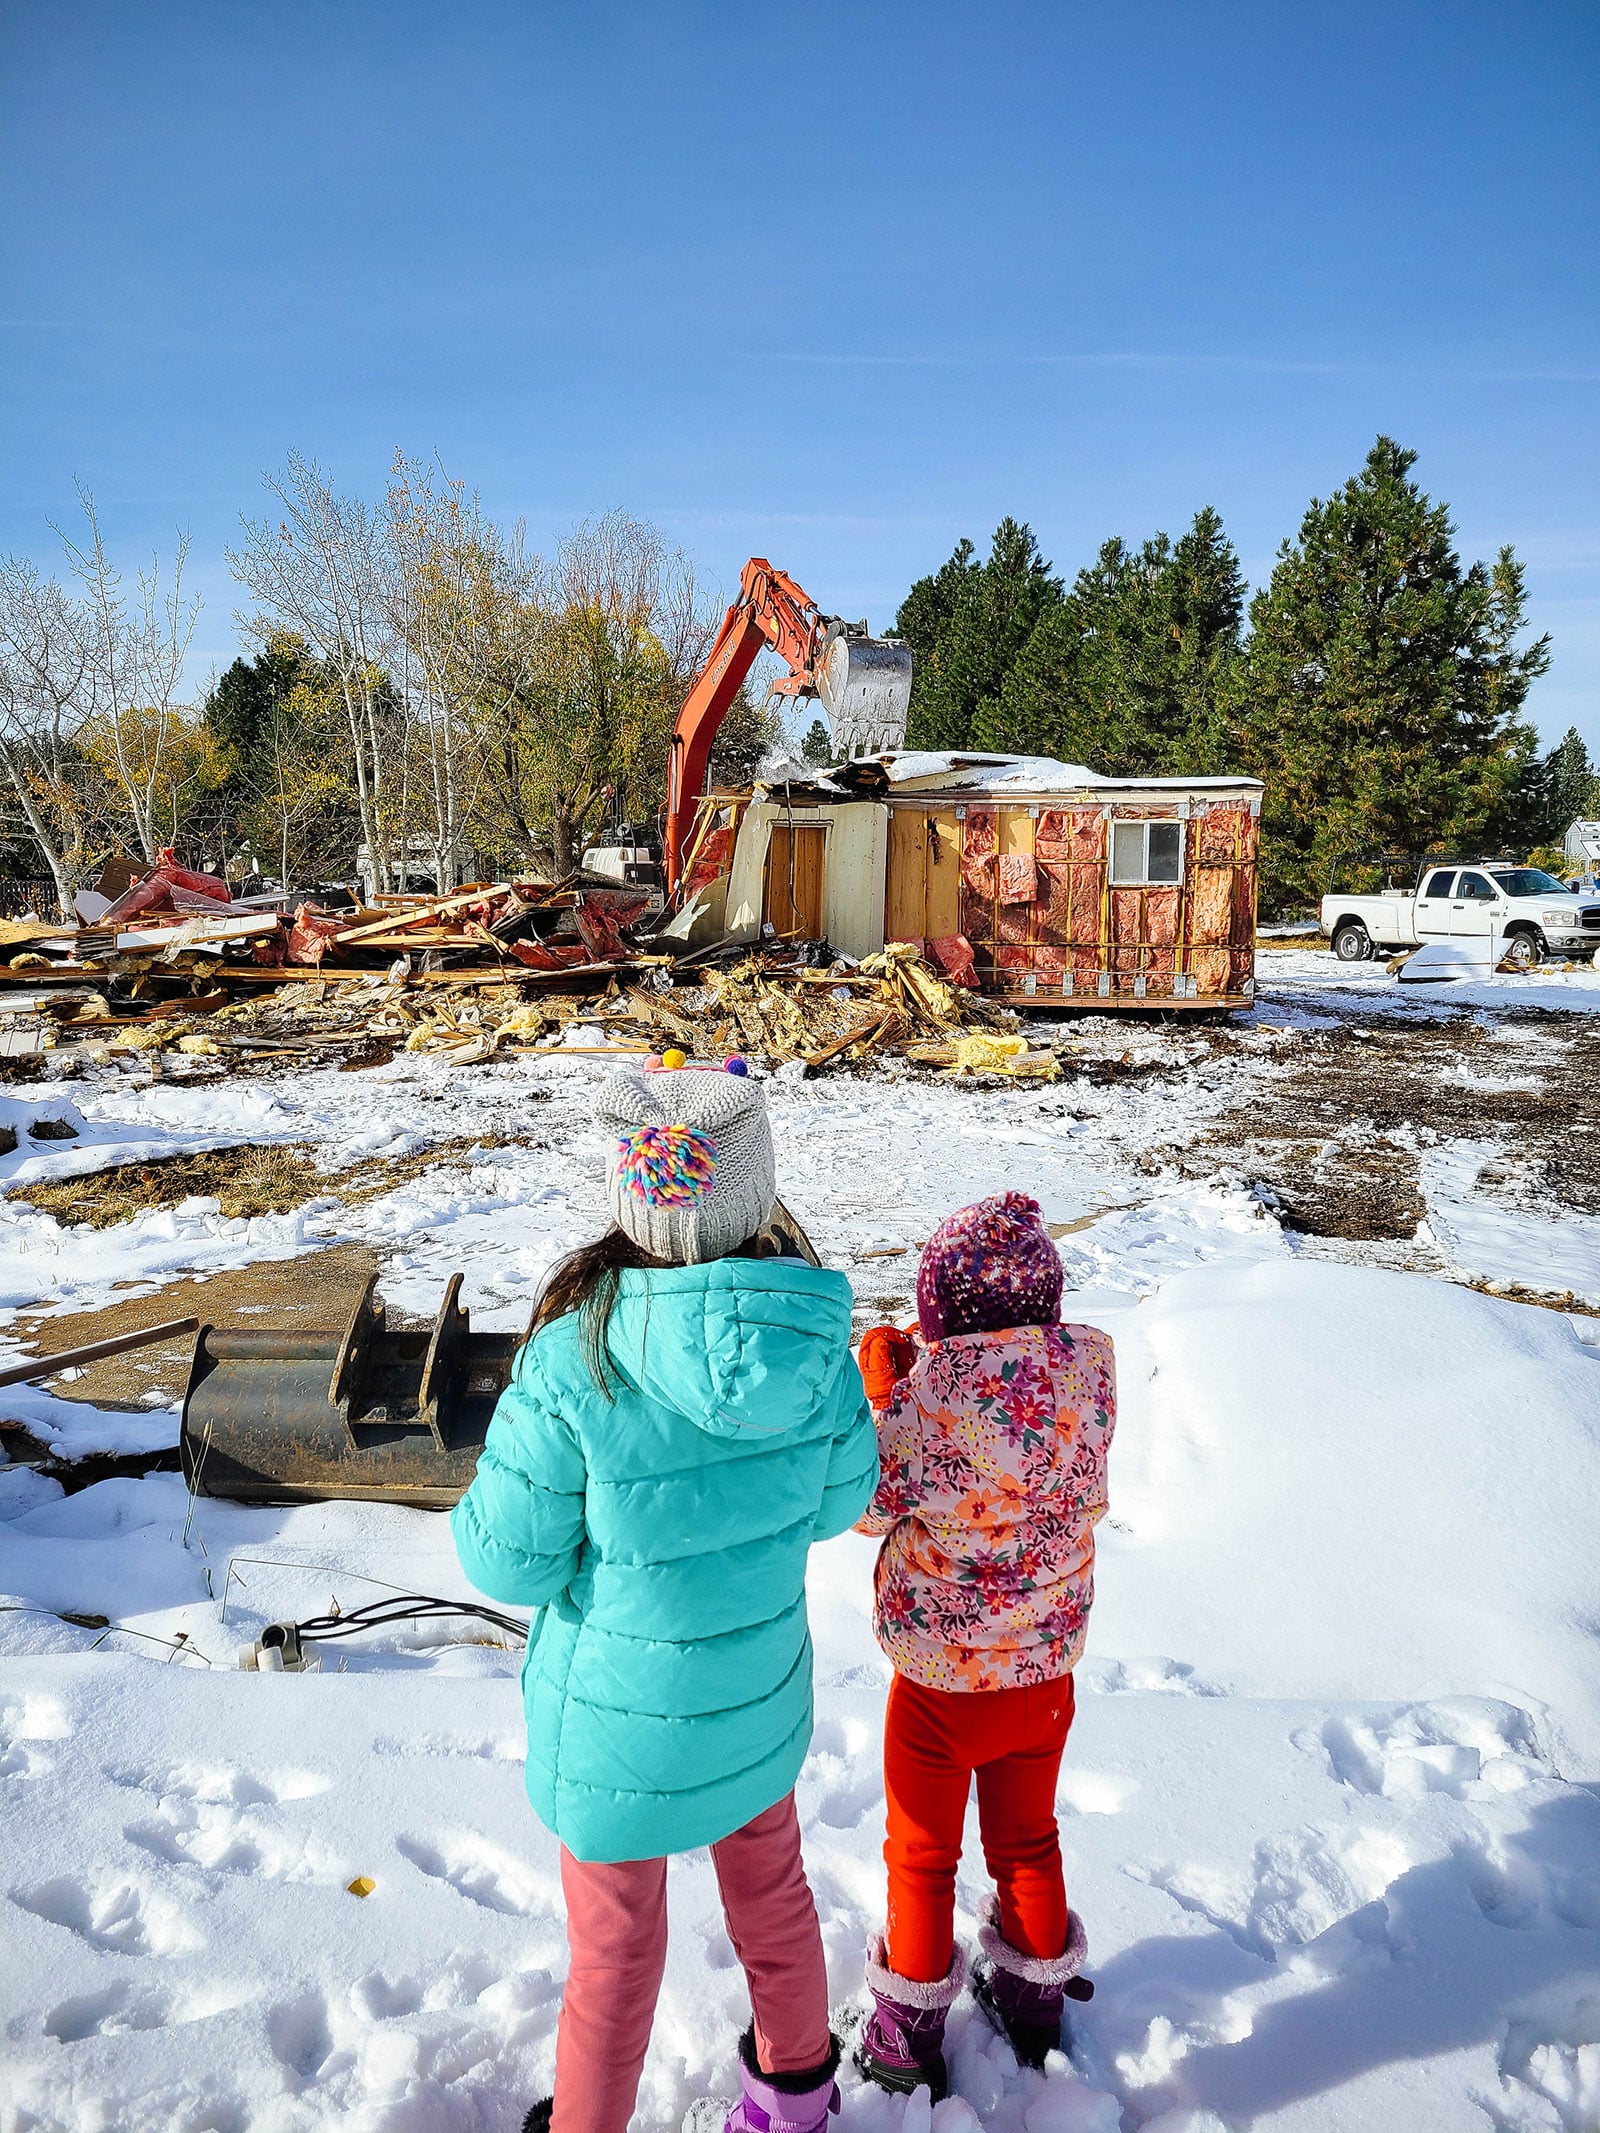 Two children in winter clothing watching a house get demolished in the snow